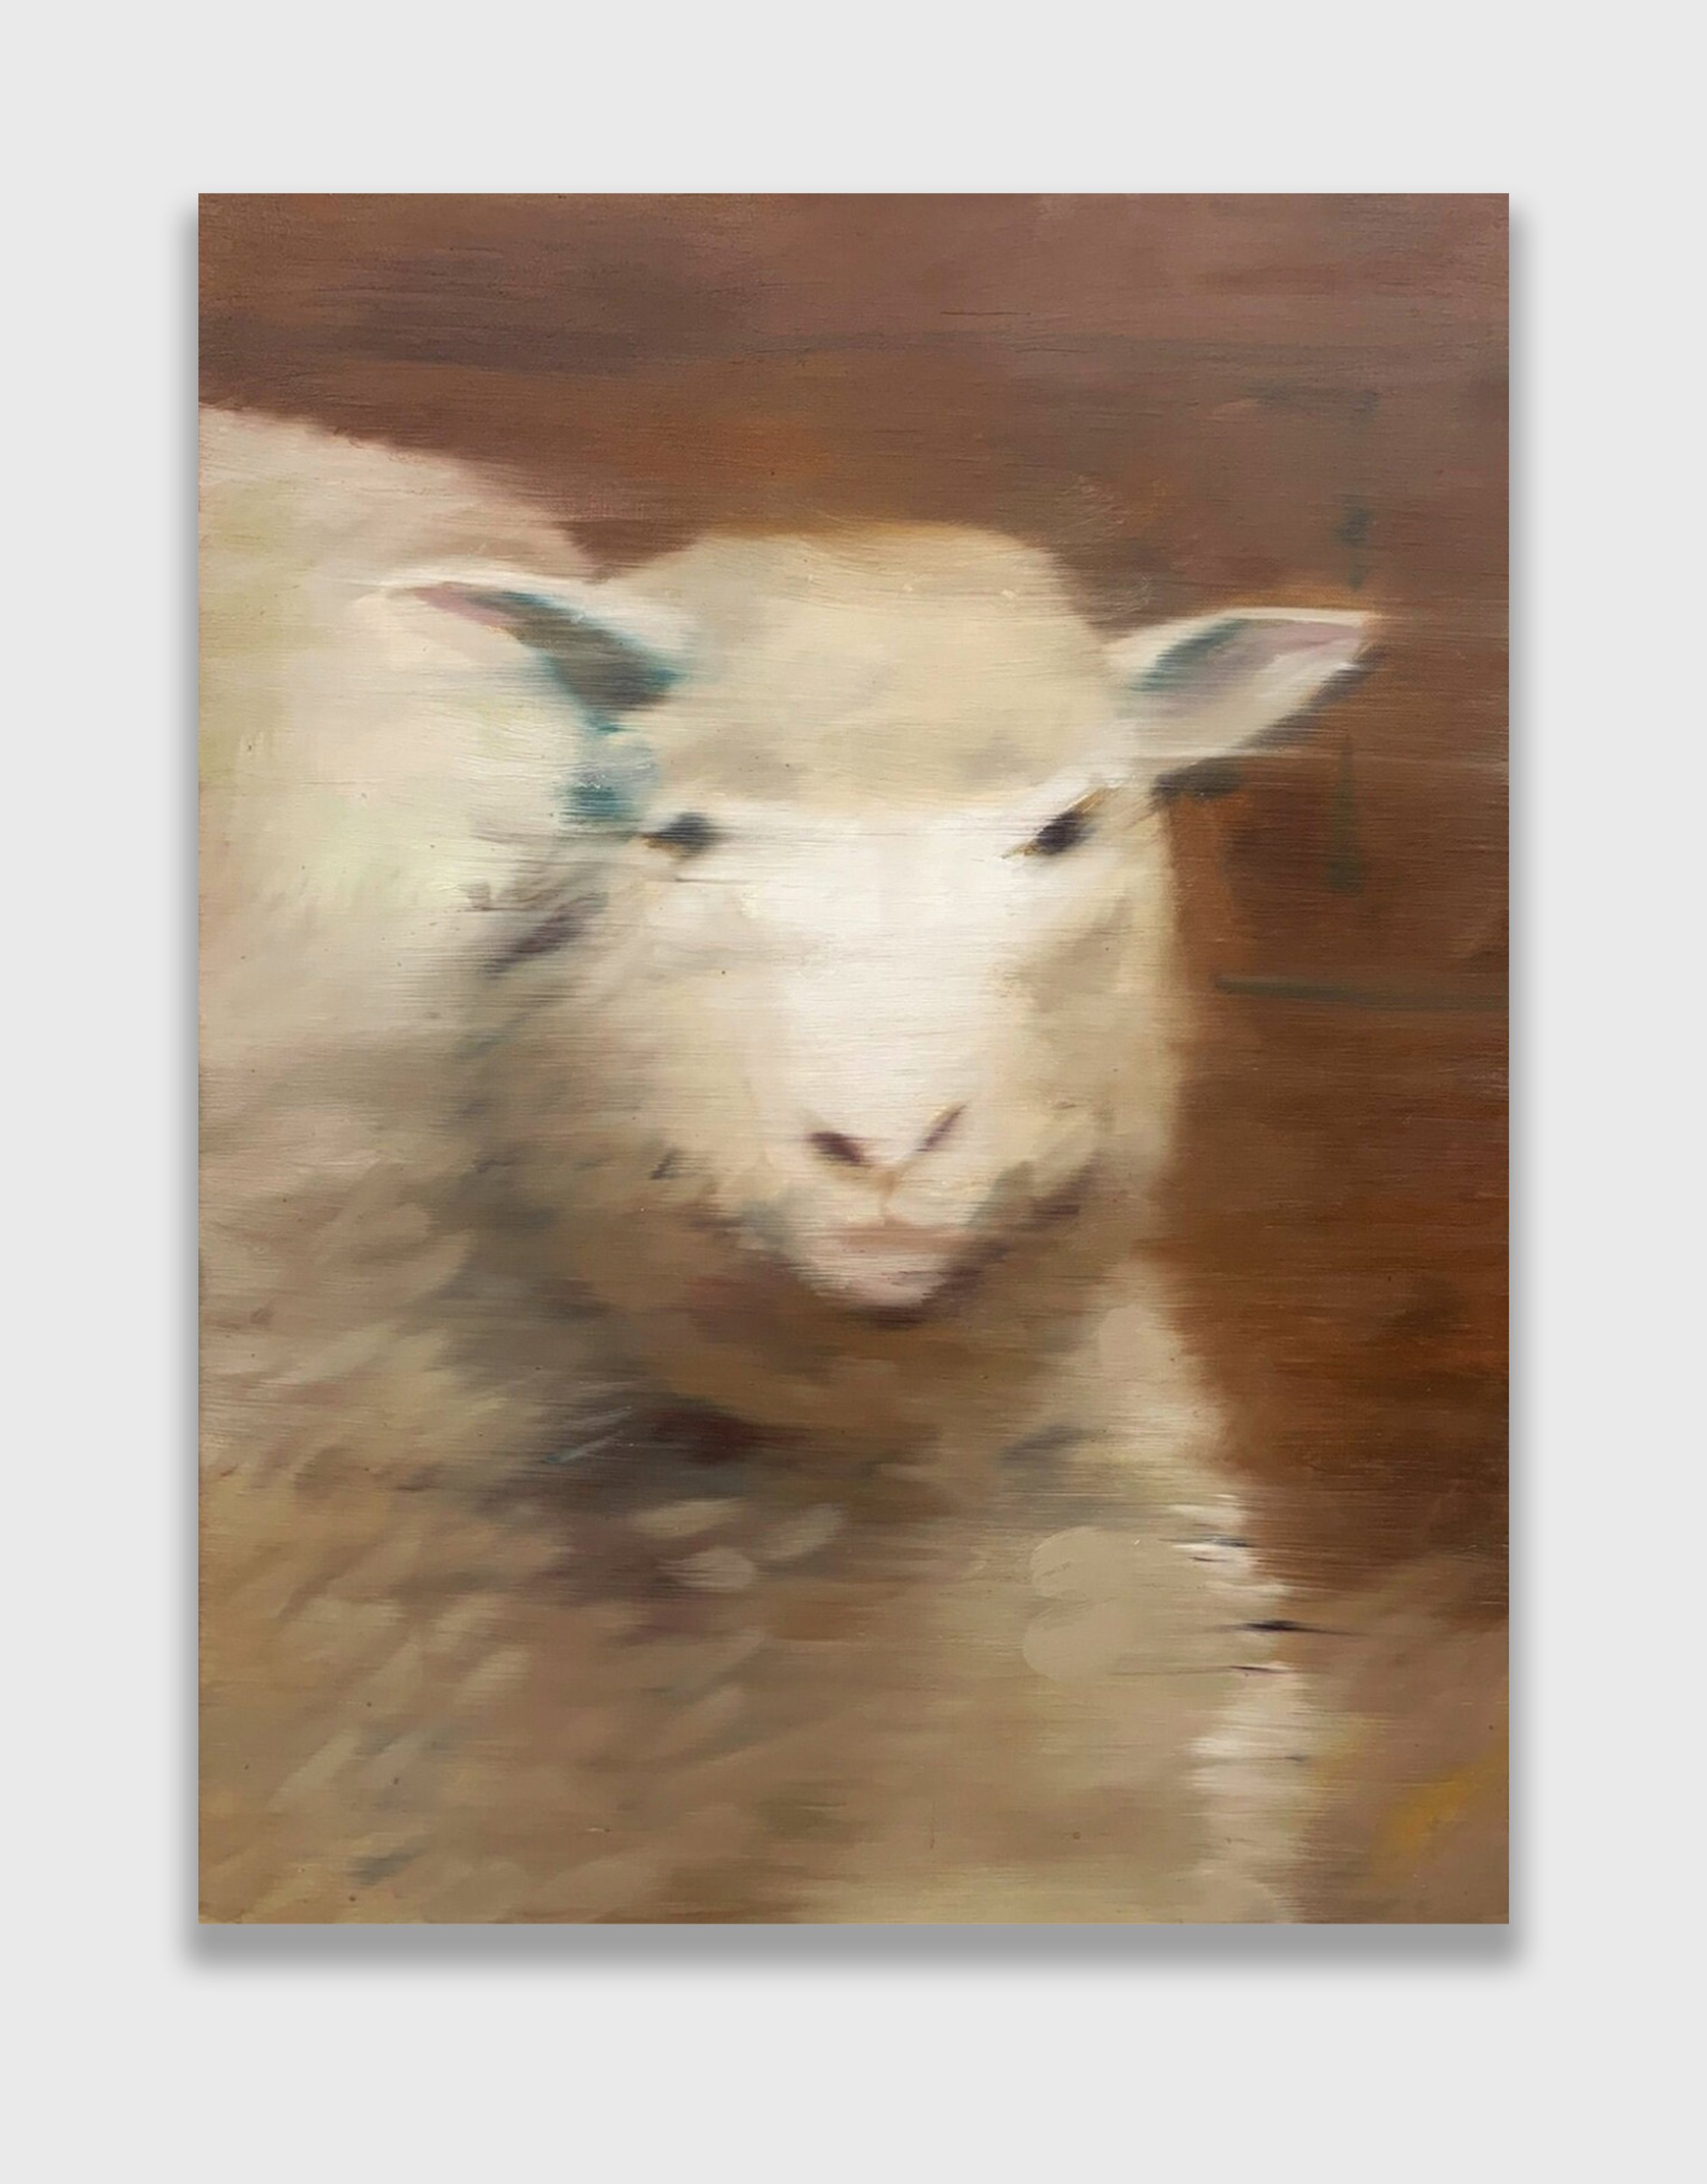   Dolly,  2021  Oil on linen  24 x 18 inches / 61 x 45.7 cm   